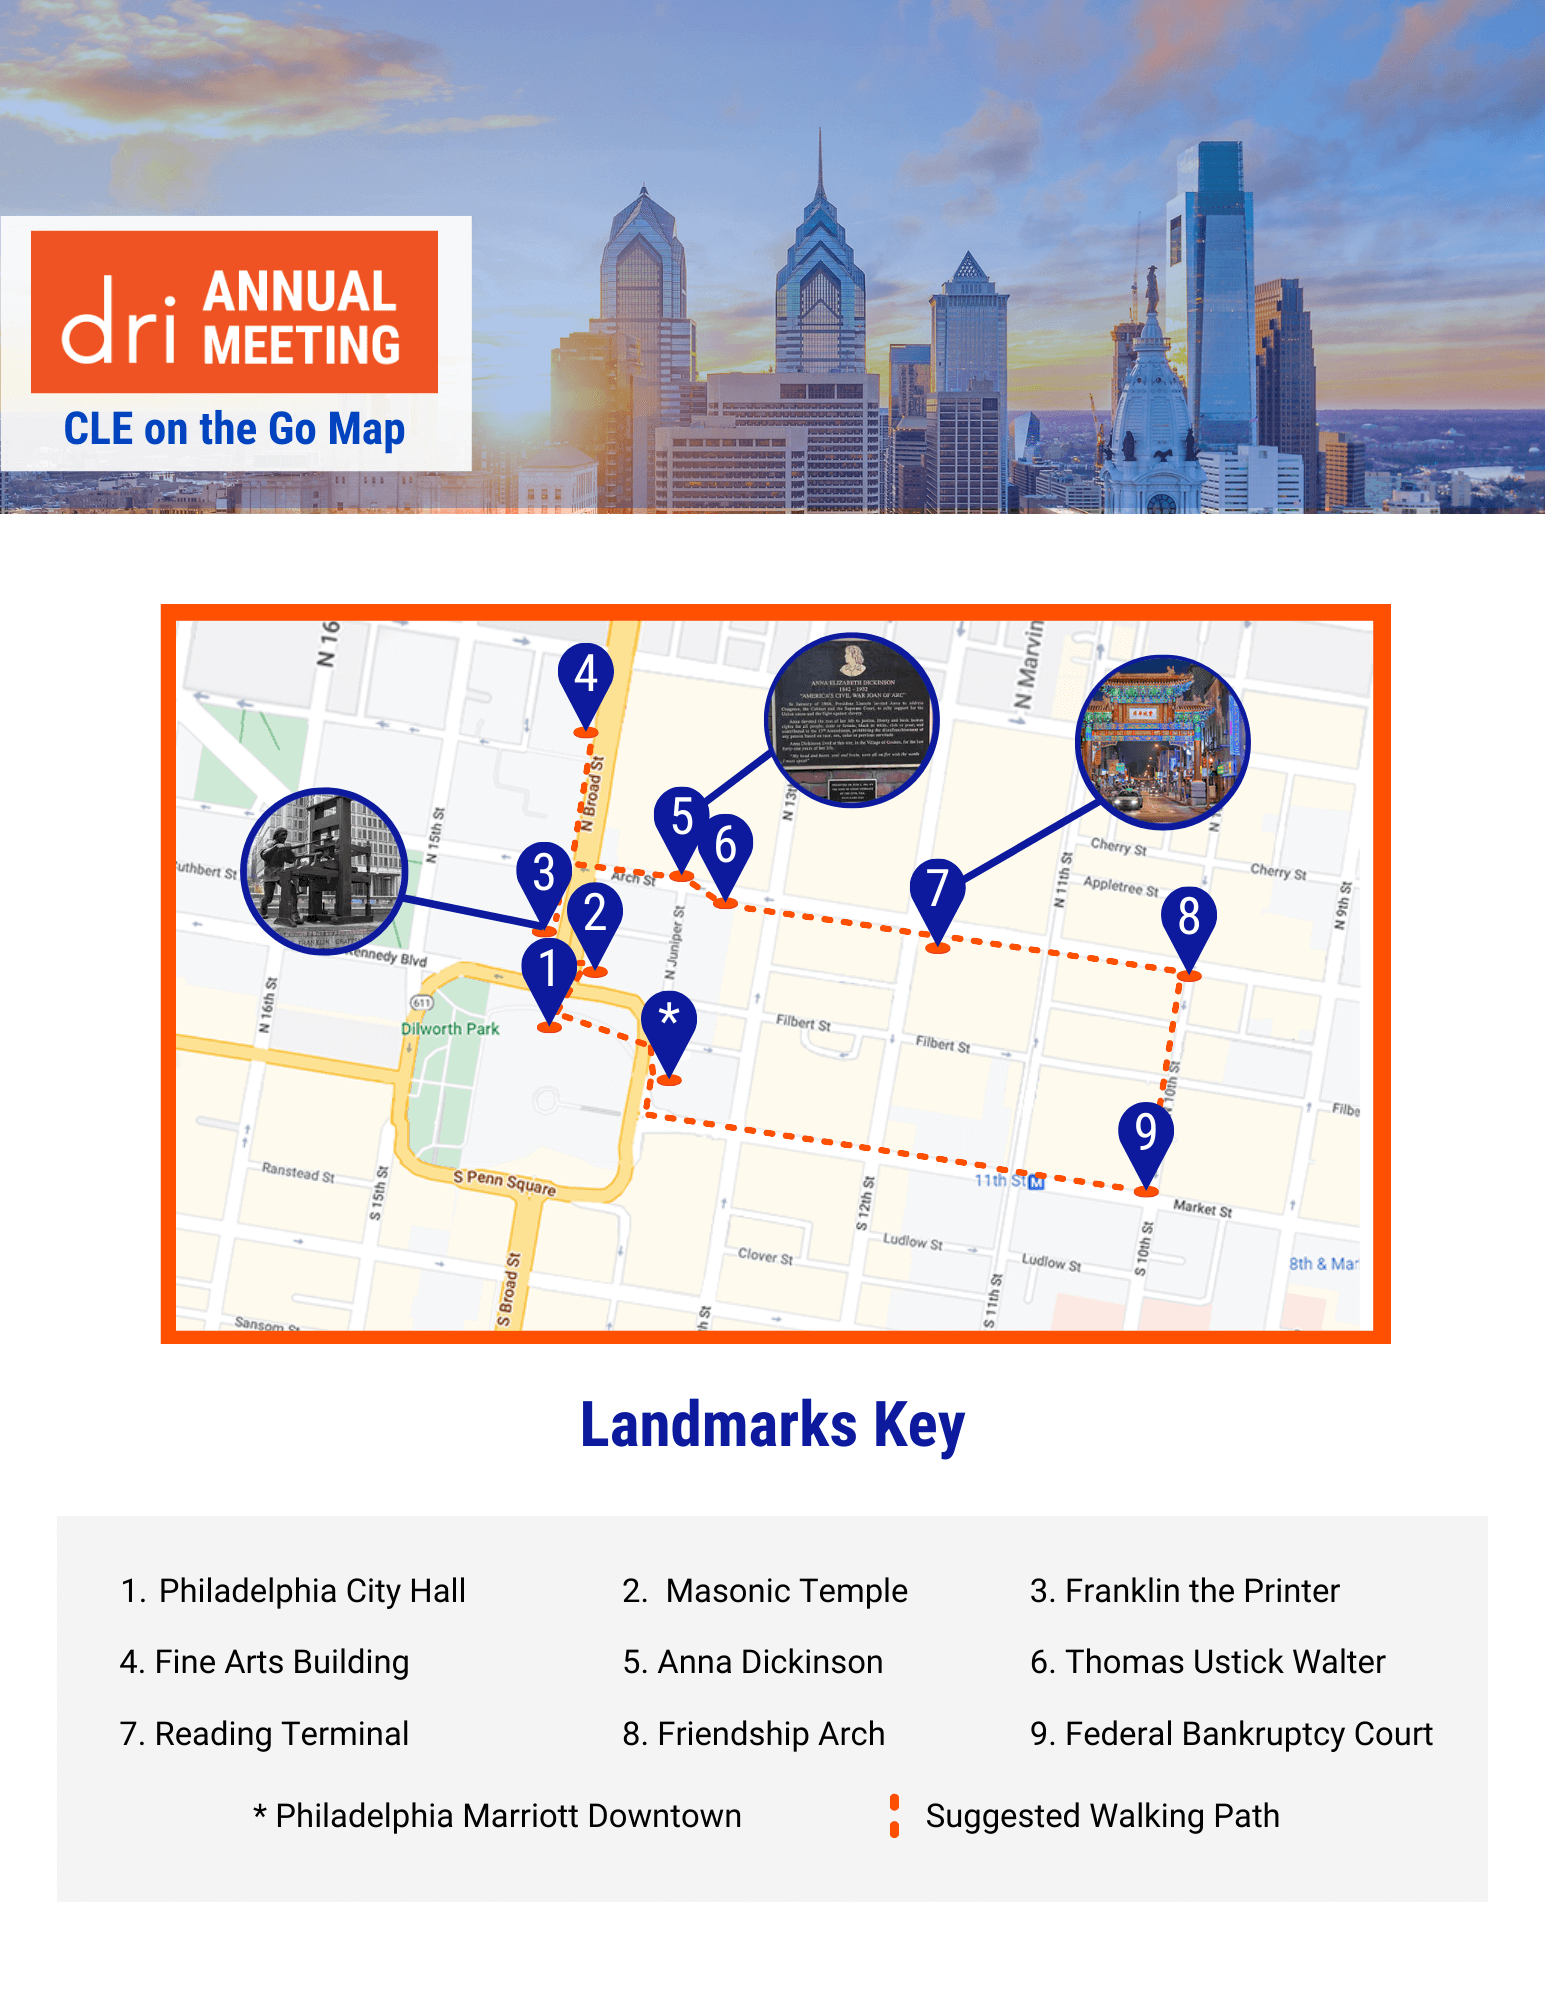 DRI 2022 Annual Meeting CLE on the Go Map